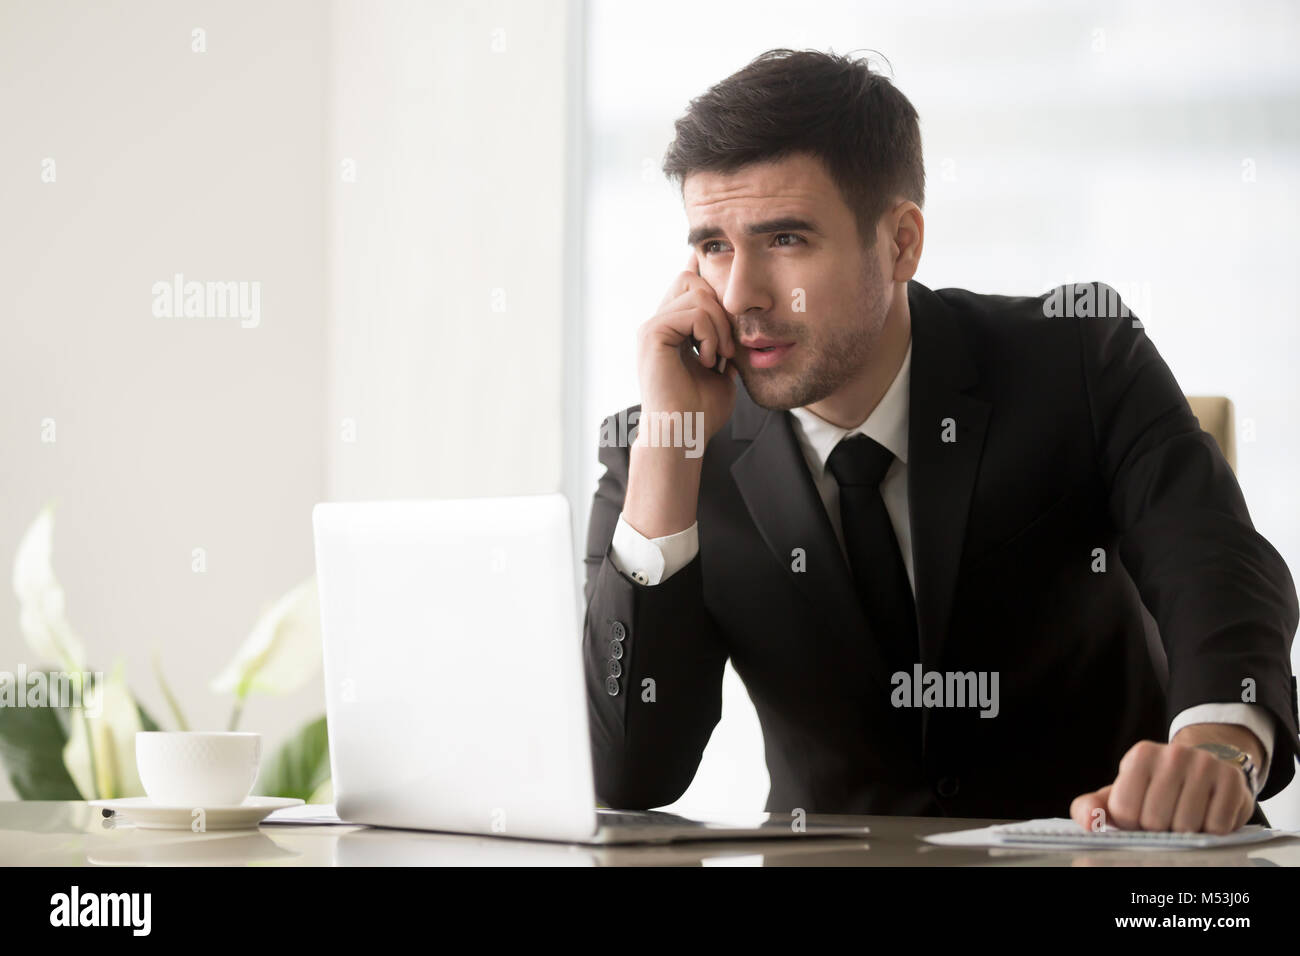 Businessman answering phone call at desk in office Stock Photo